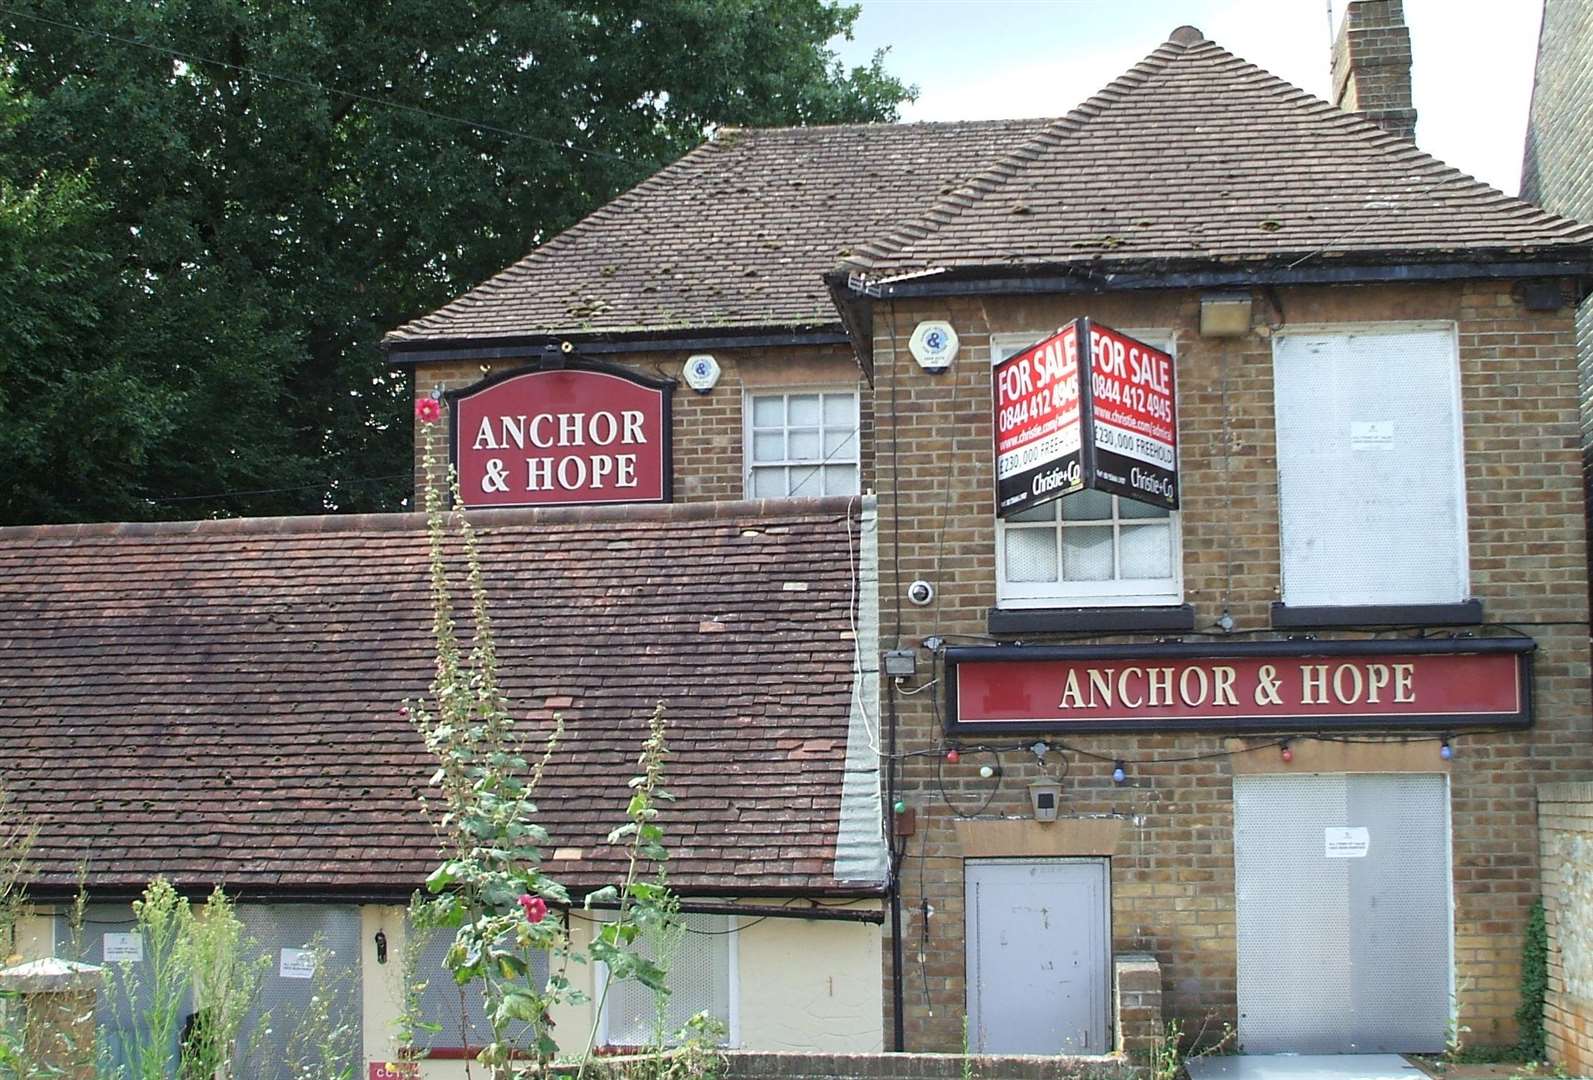 The Anchor and Hope in Maidstone shut its doors in 2010